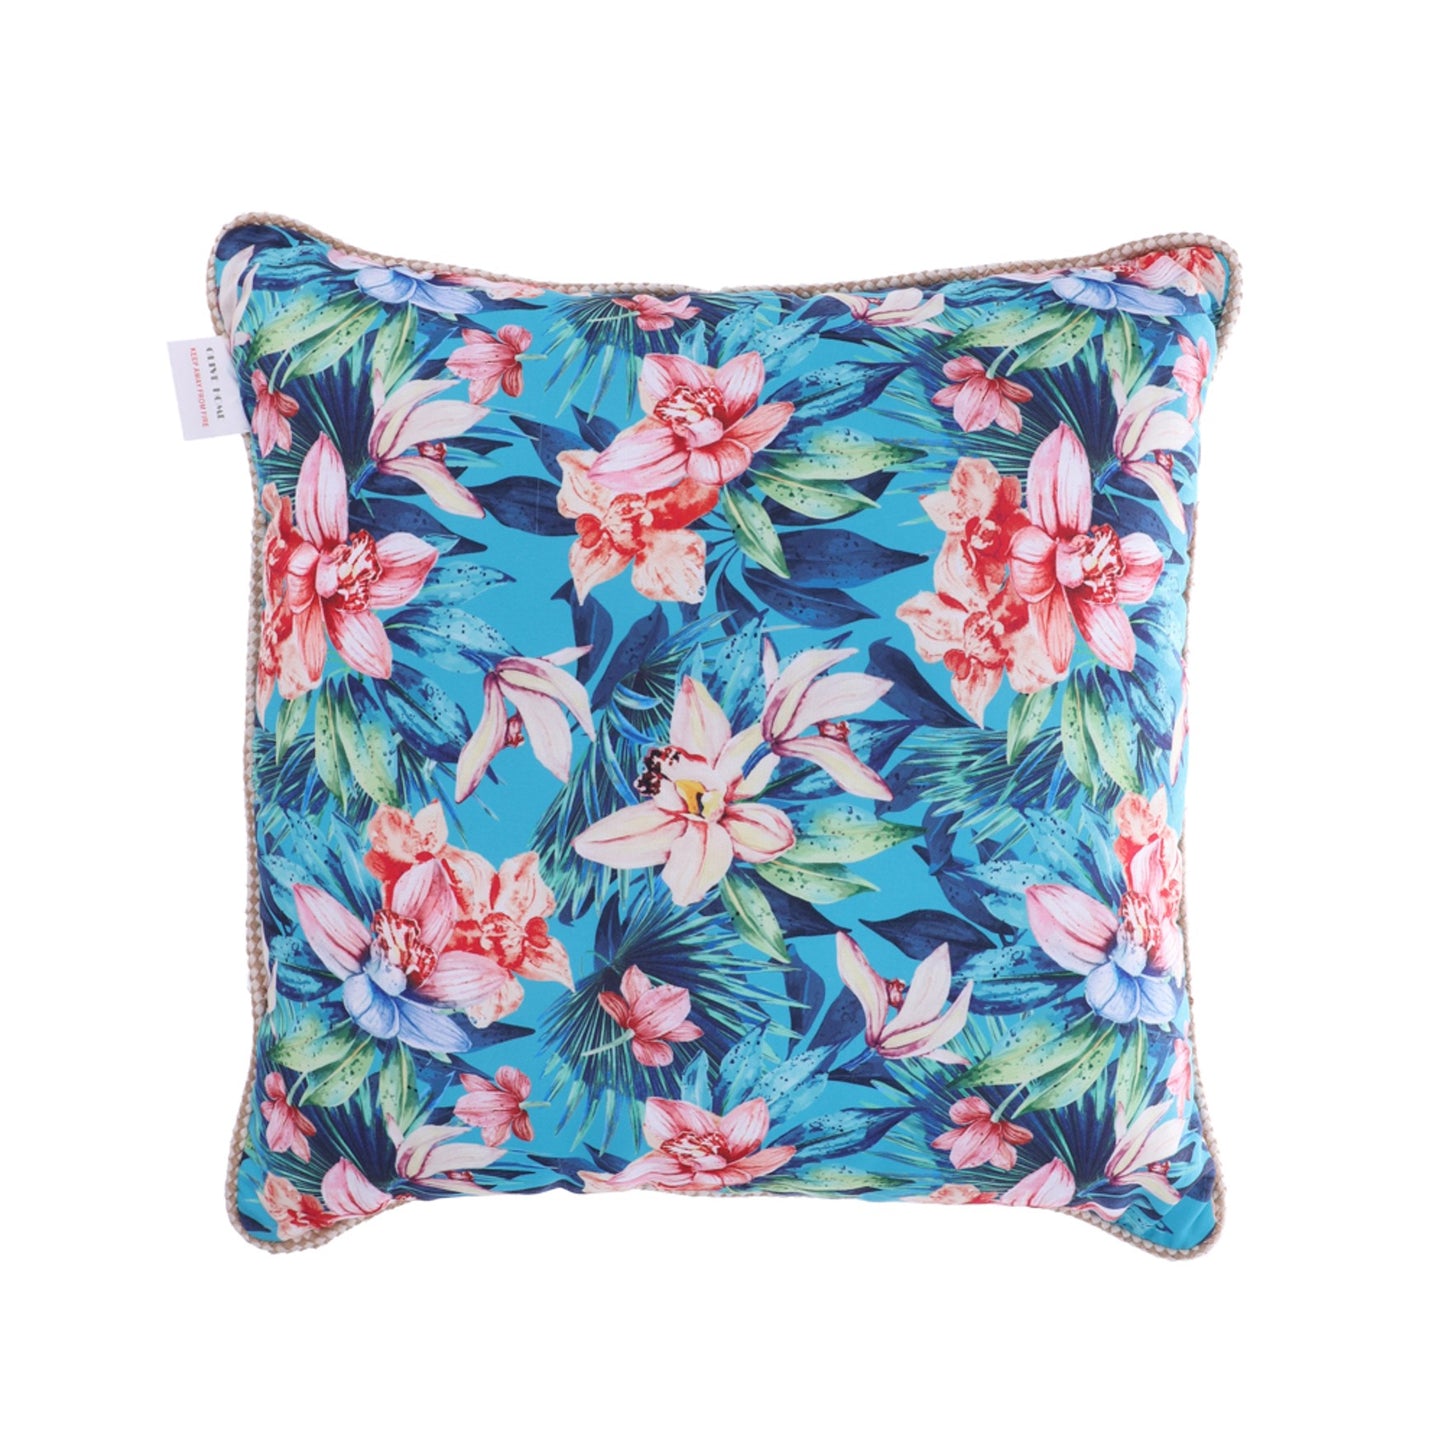 COOSUN Lily Flowers Pillow Case Cover Linen Home Decorative Invisible Zipper Throw Cushion Case for Sofa and Bed Cushion